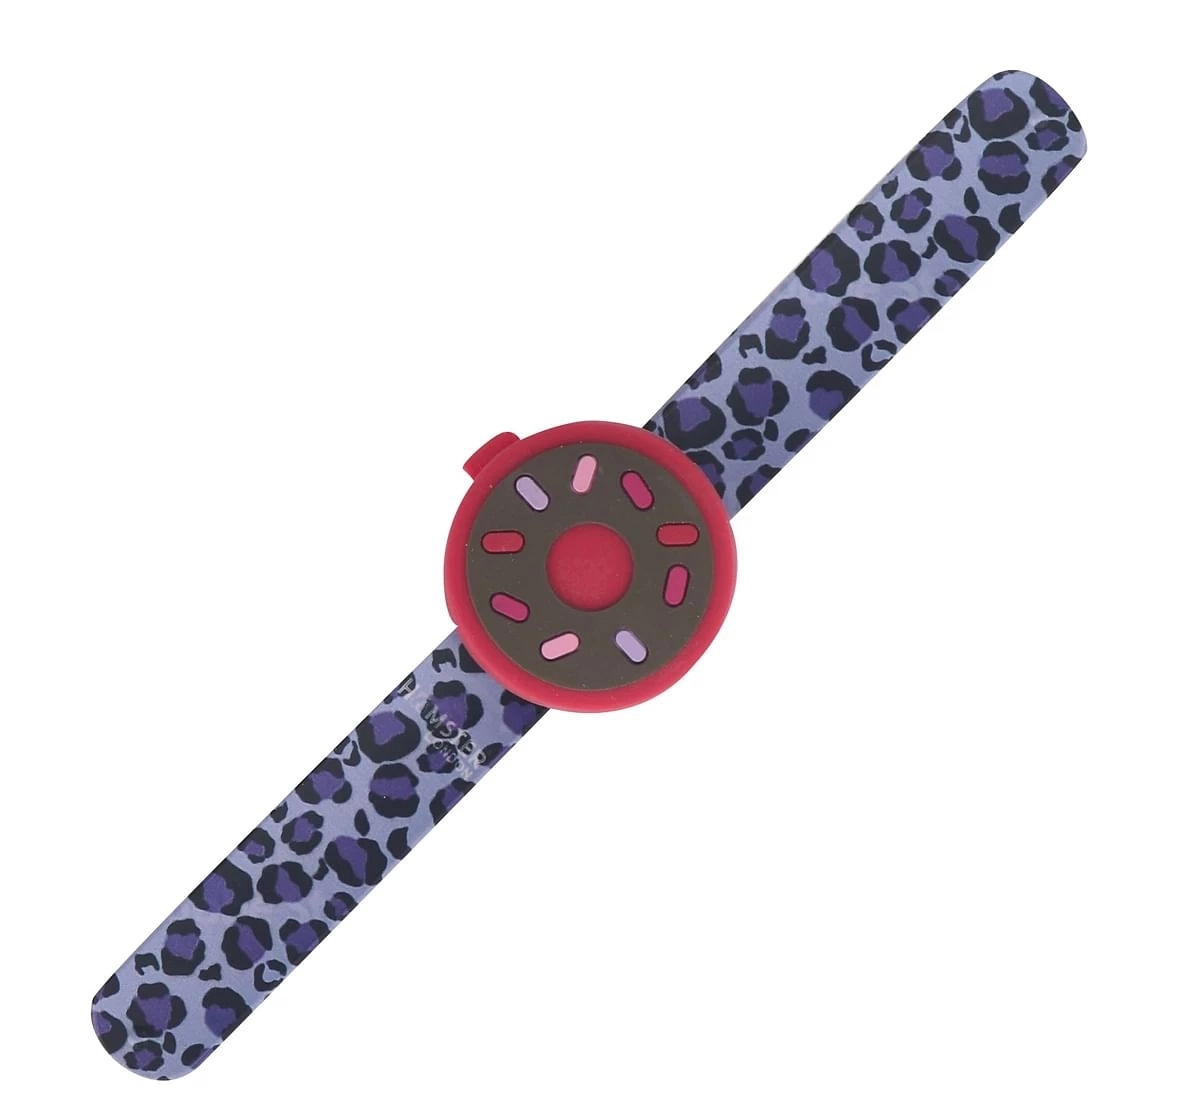 Watches & Clocks - Time for a Watch or Alarm Clock | Smiggle™ Online